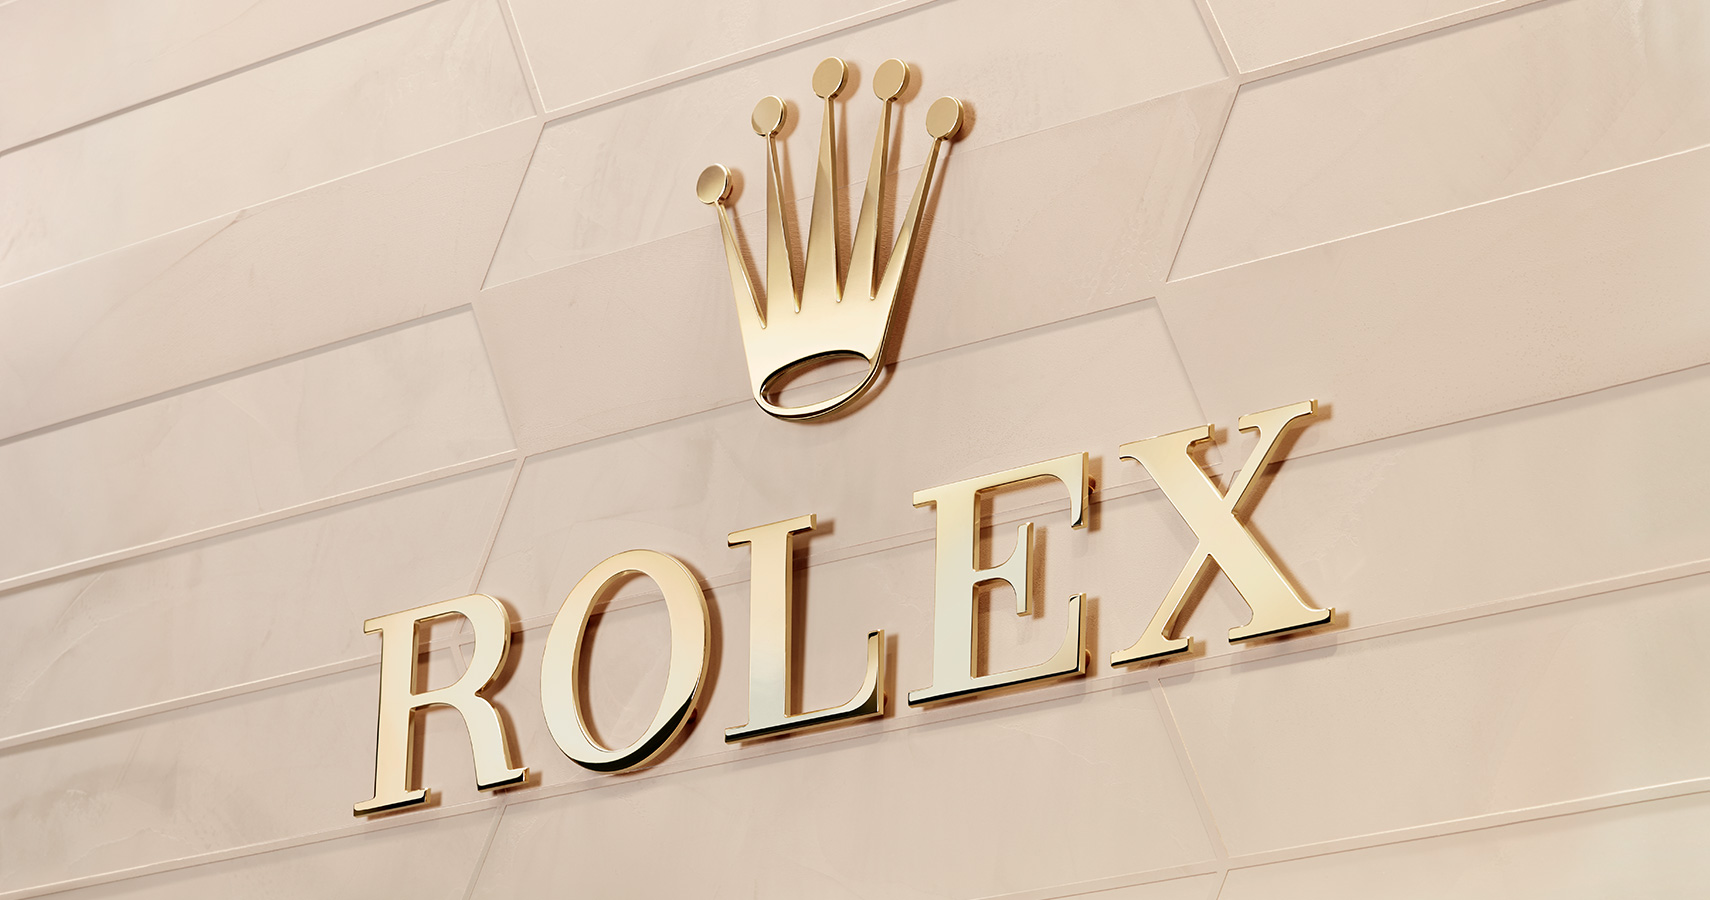 La Mine dOr is an Official Rolex Retailer allowed to sell Rolex watches in NB and PEI Canada